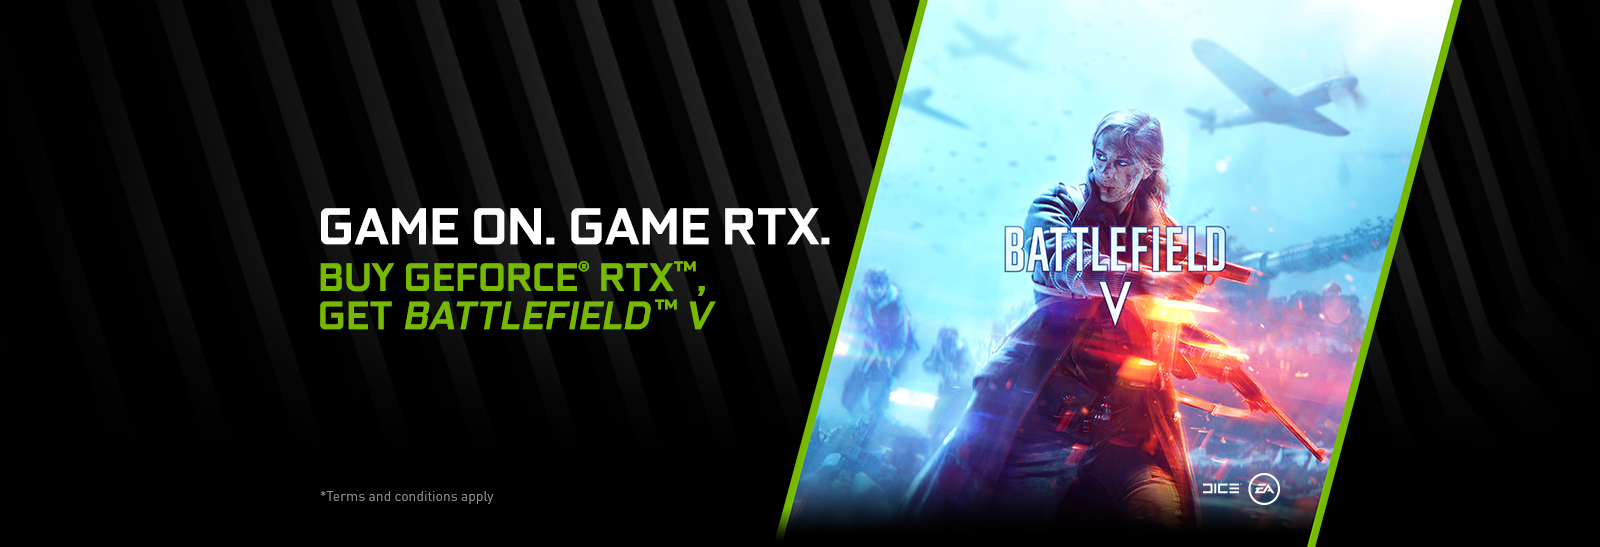 game_on_game_rtx